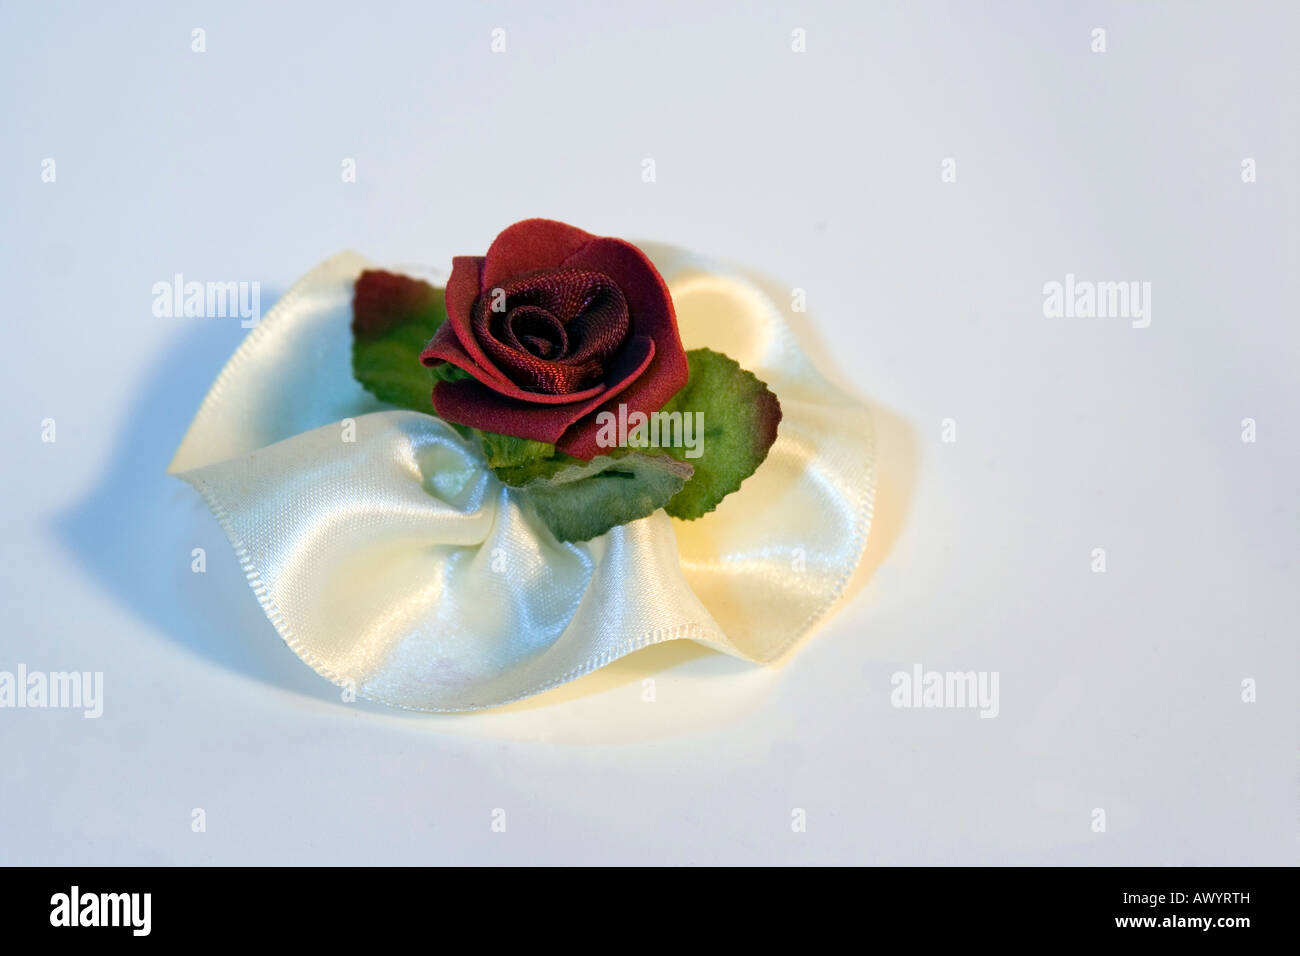 Red rose corsage, on white background. Stock Photo